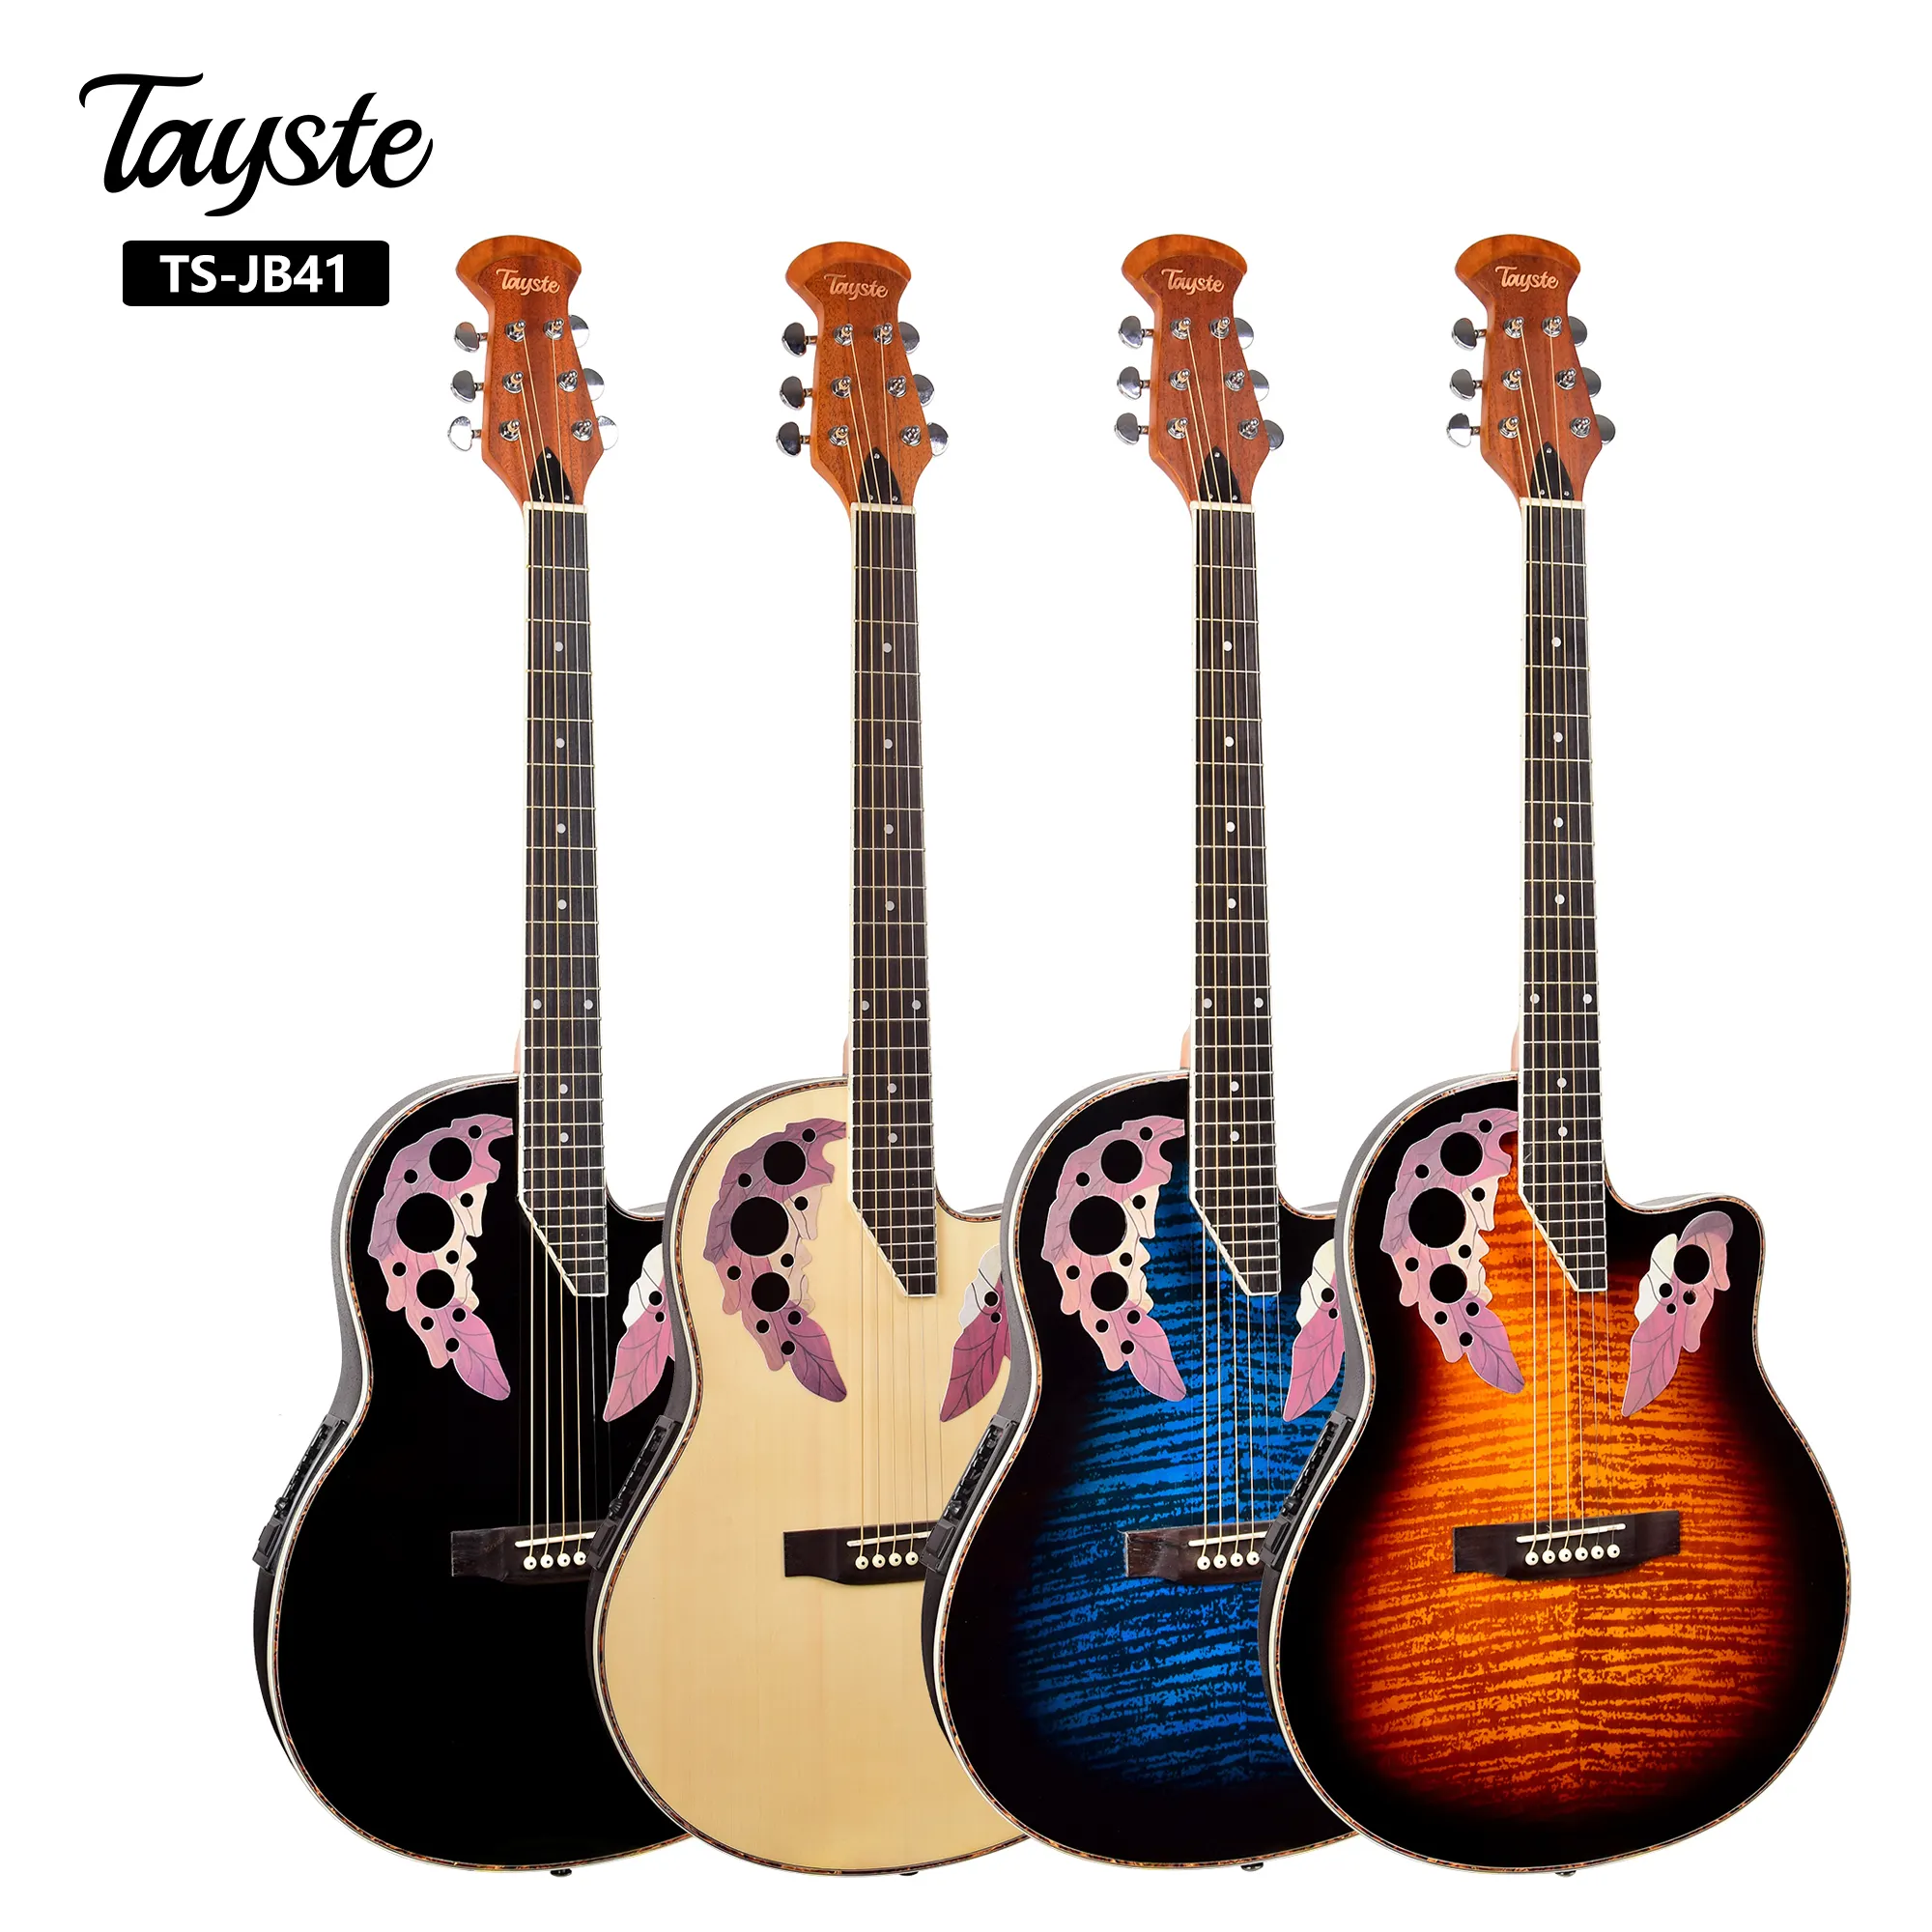 Tayste 41" ovation musical instruments electric acoustic guitars built in pickup EQ-7545R made in China